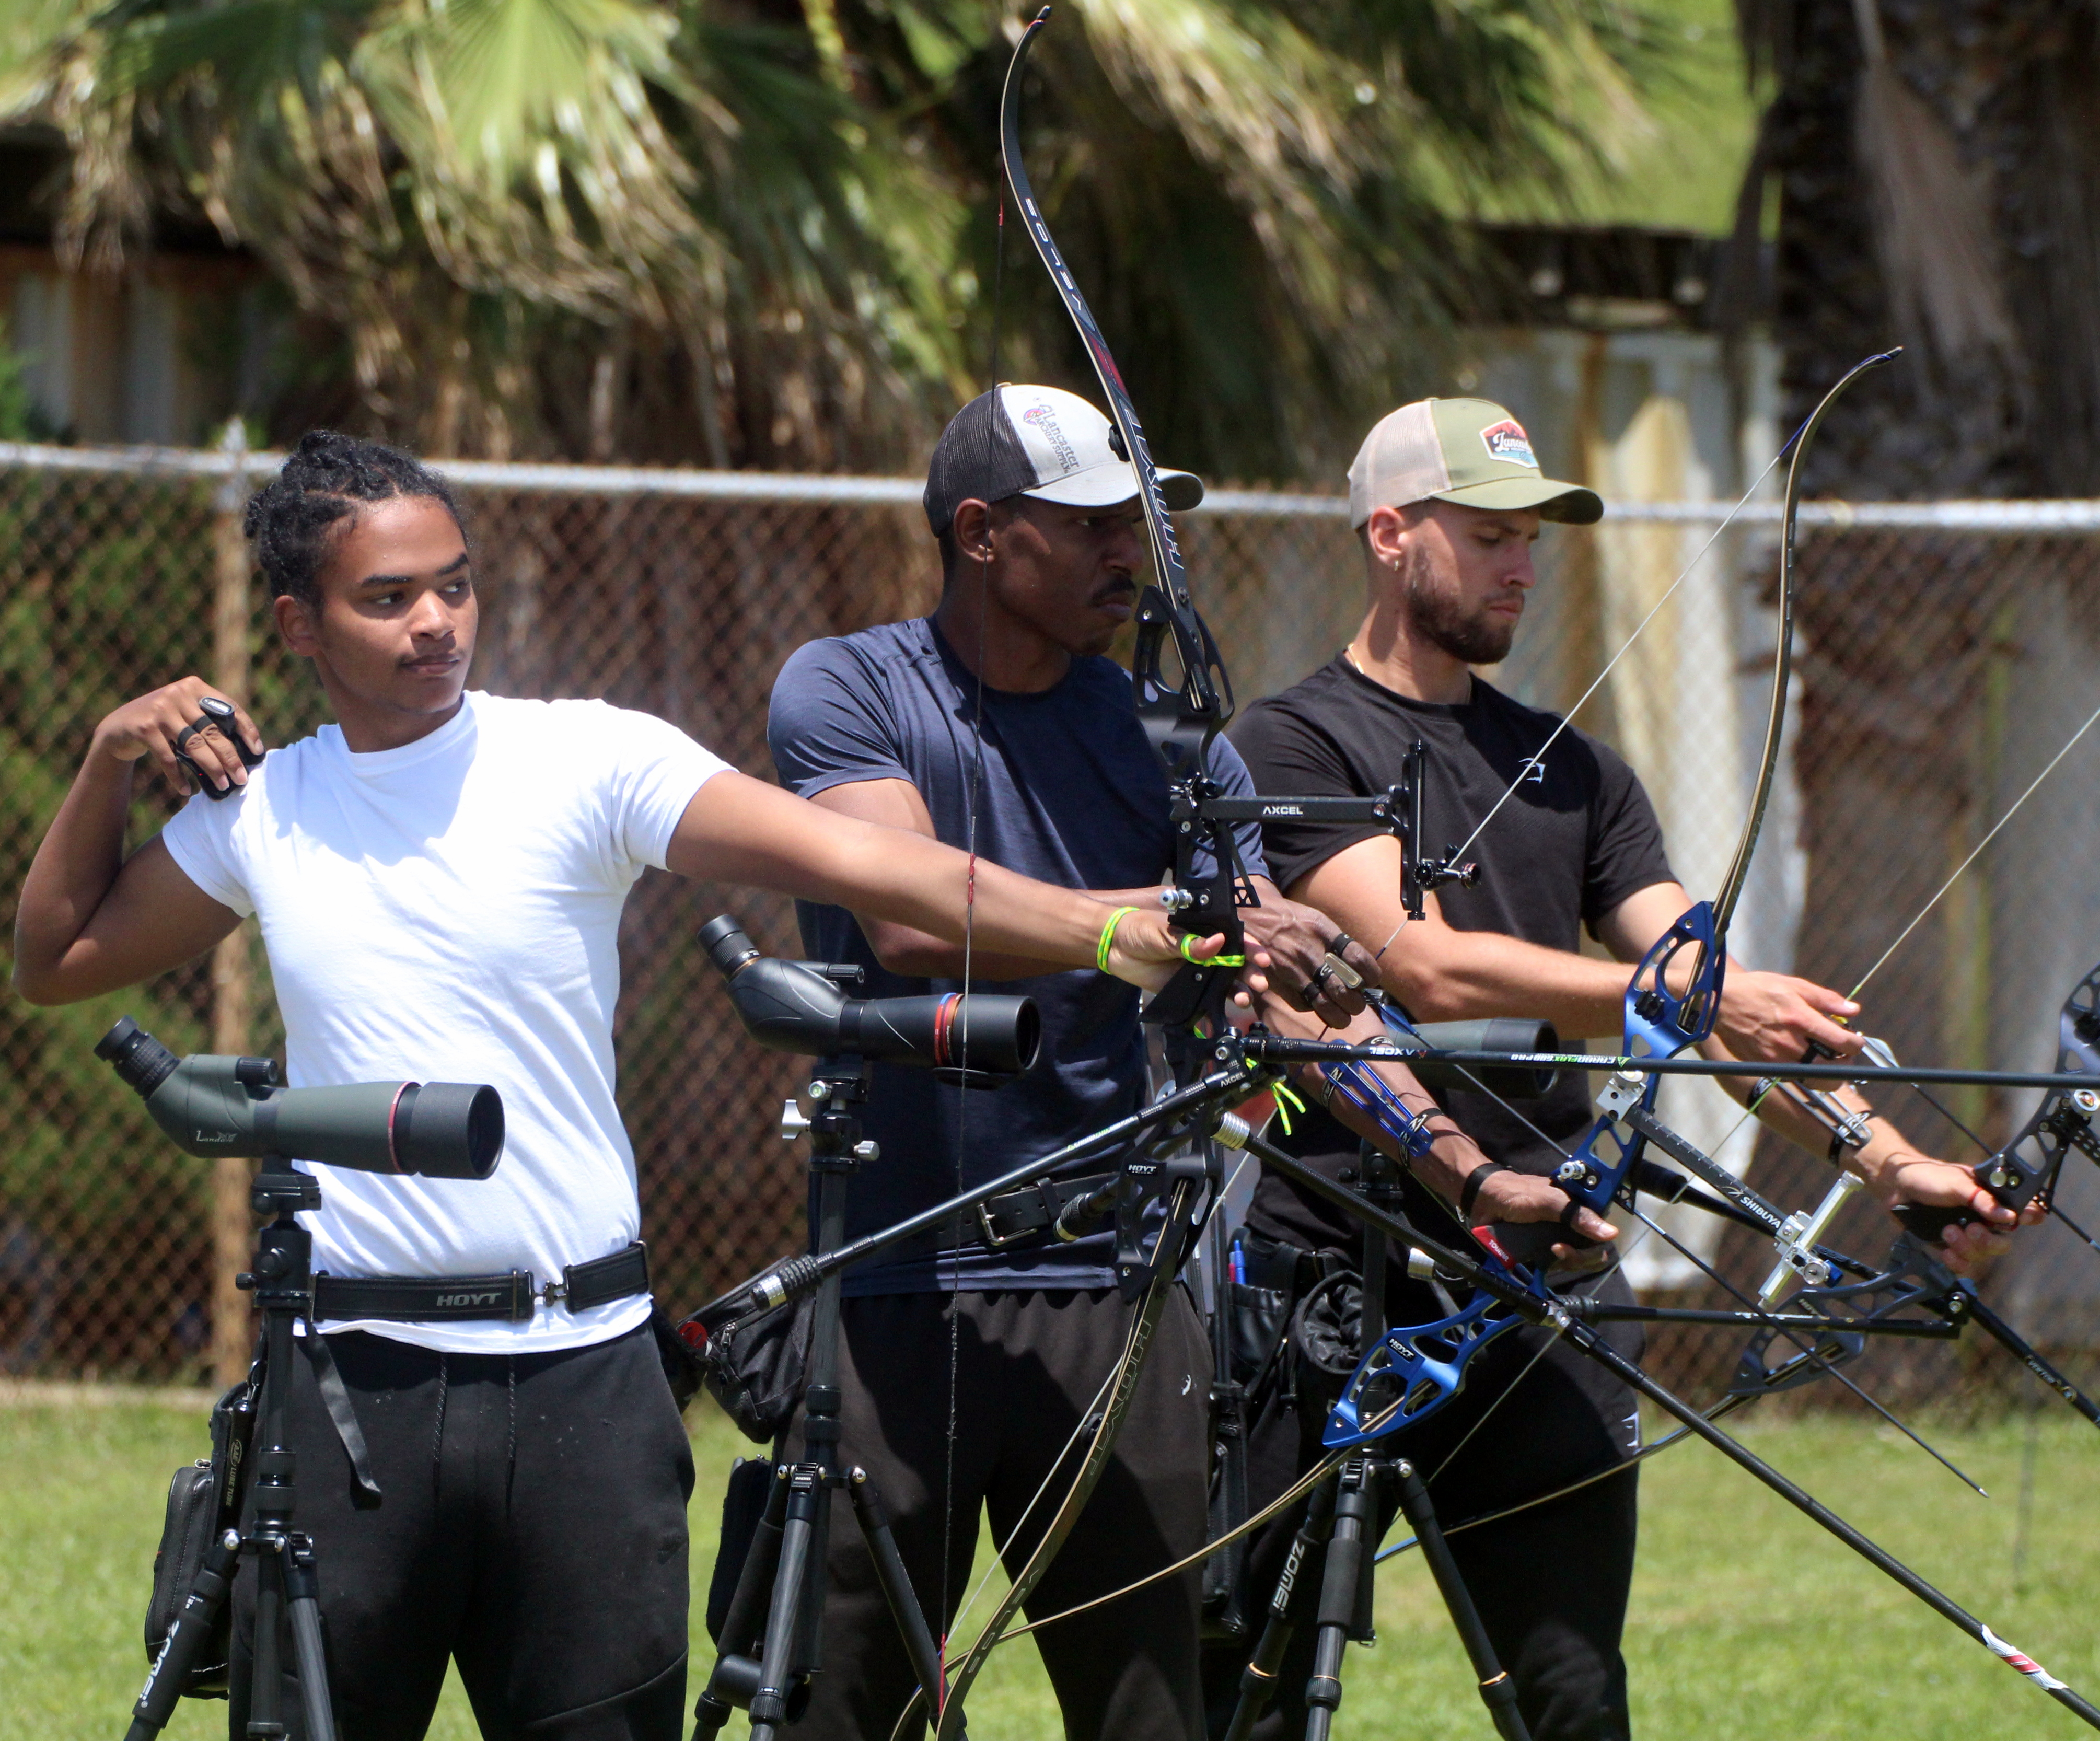 Bermuda Archers Compete in Monthly Shoot (Other Sports)